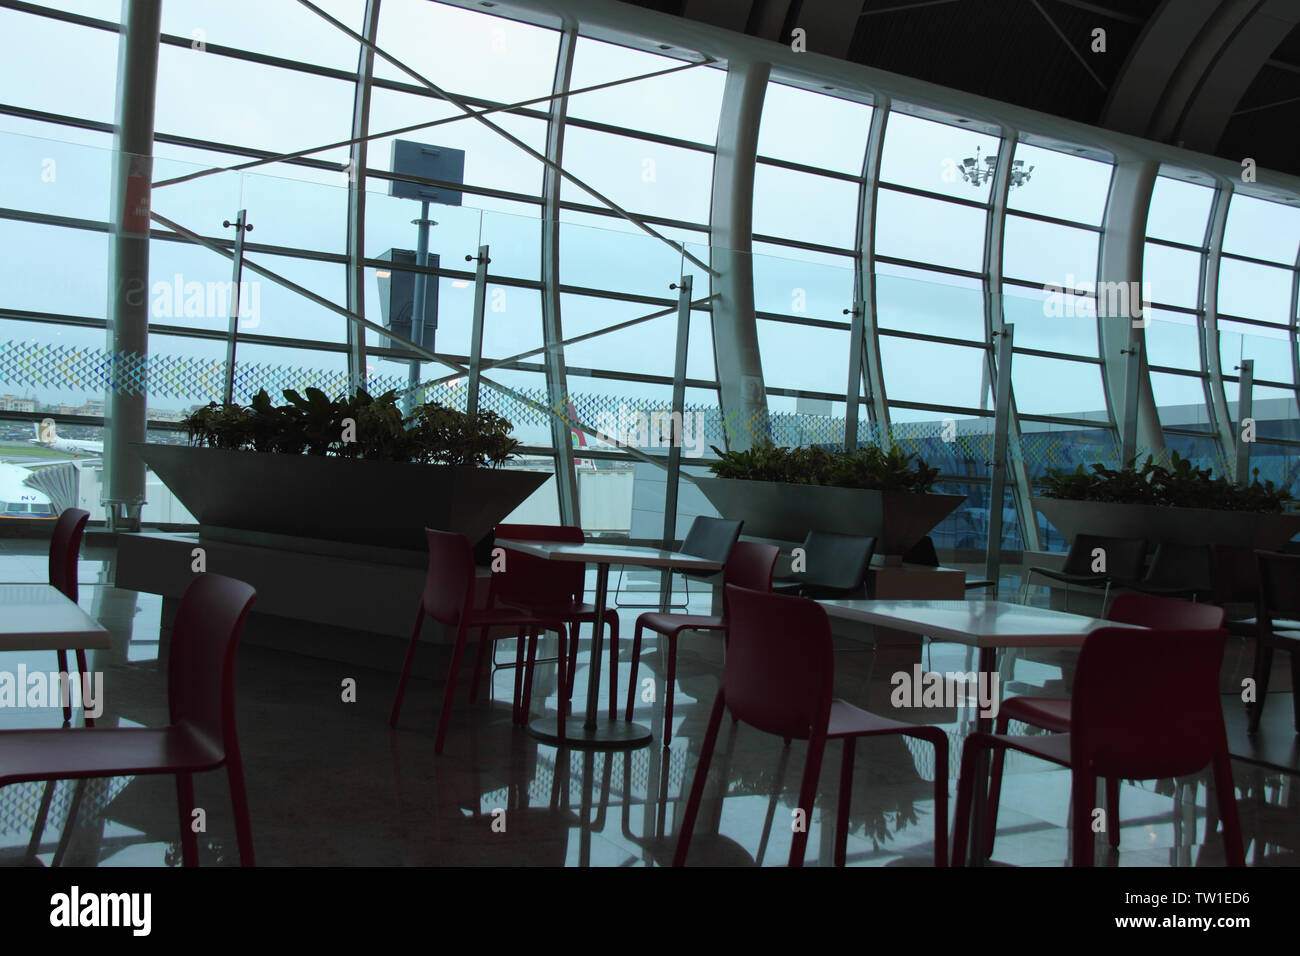 Cafe in an airport, India Stock Photo